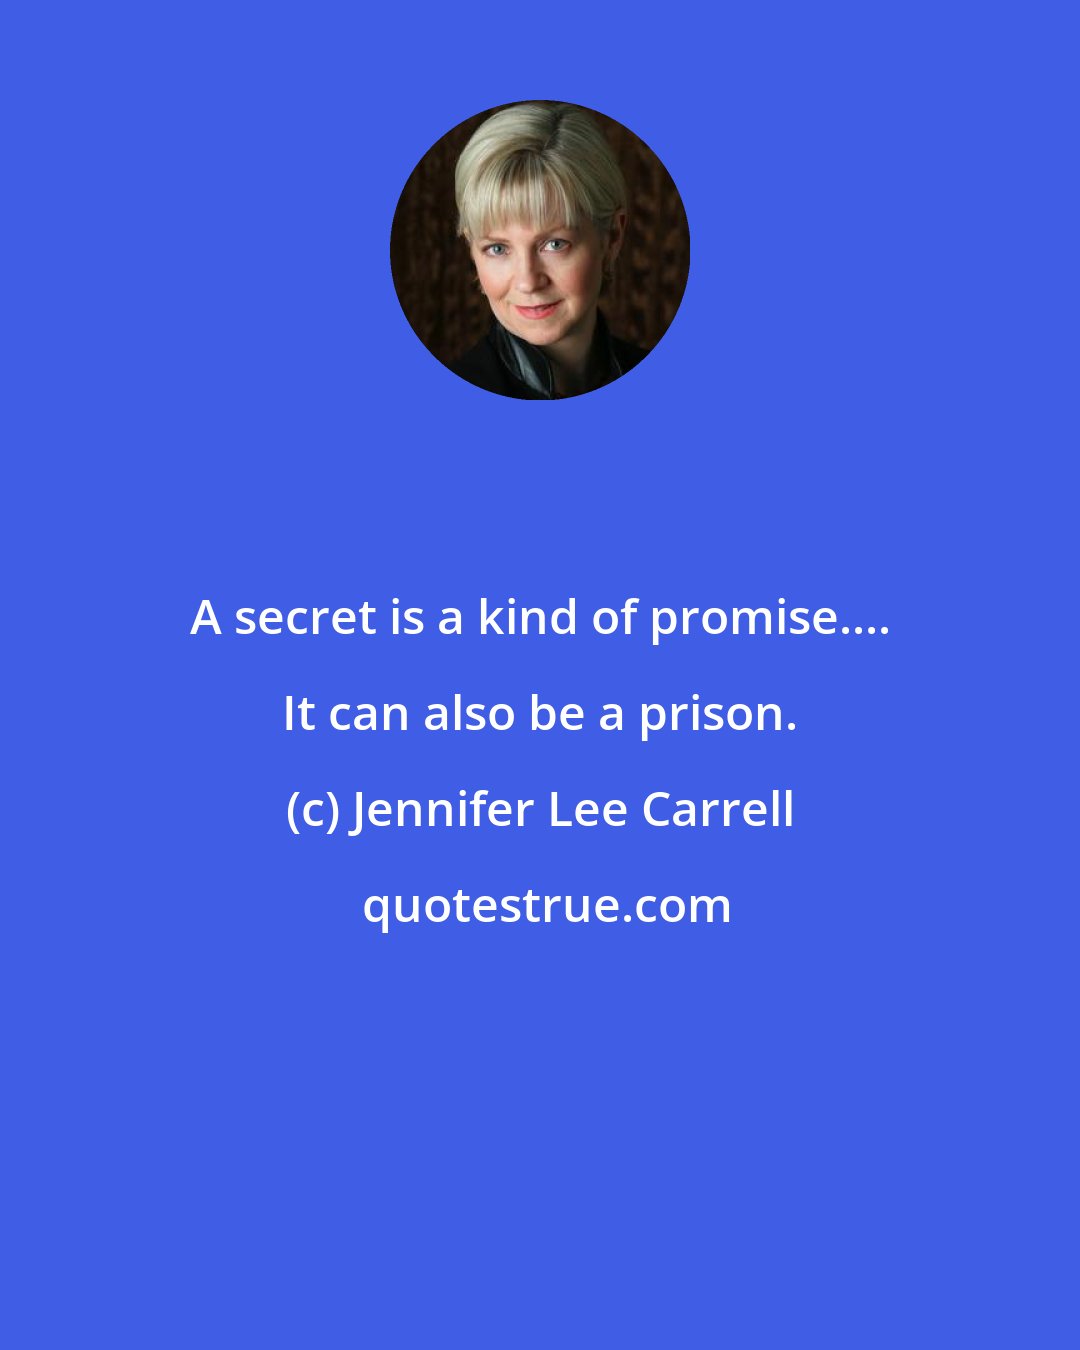 Jennifer Lee Carrell: A secret is a kind of promise.... It can also be a prison.